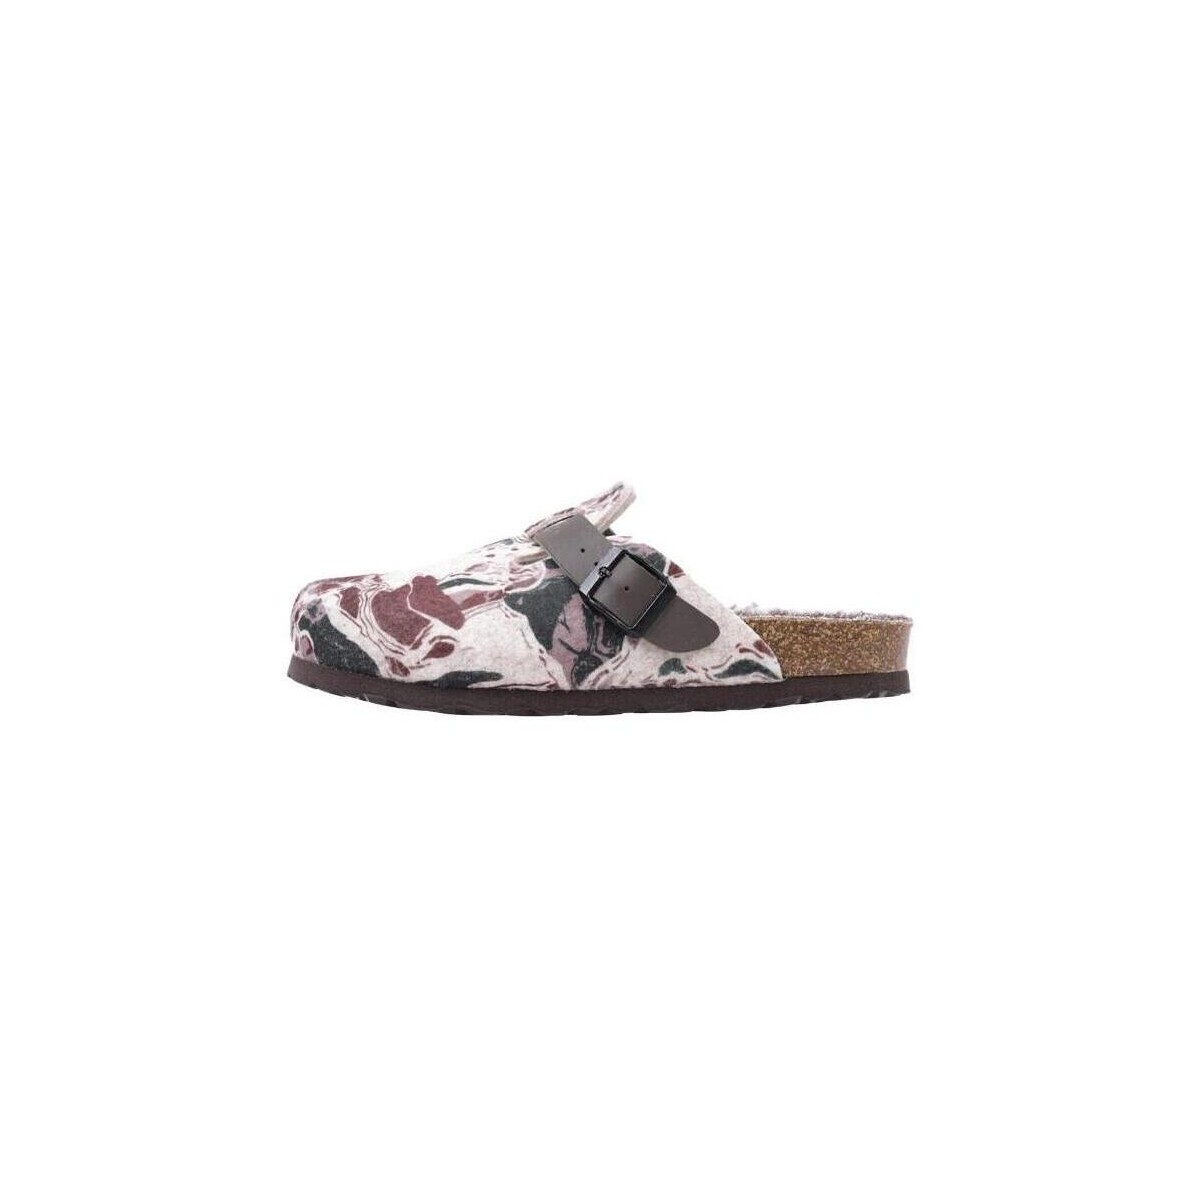 Sapatos Mulher Chinelos Nice MARBLE Bege